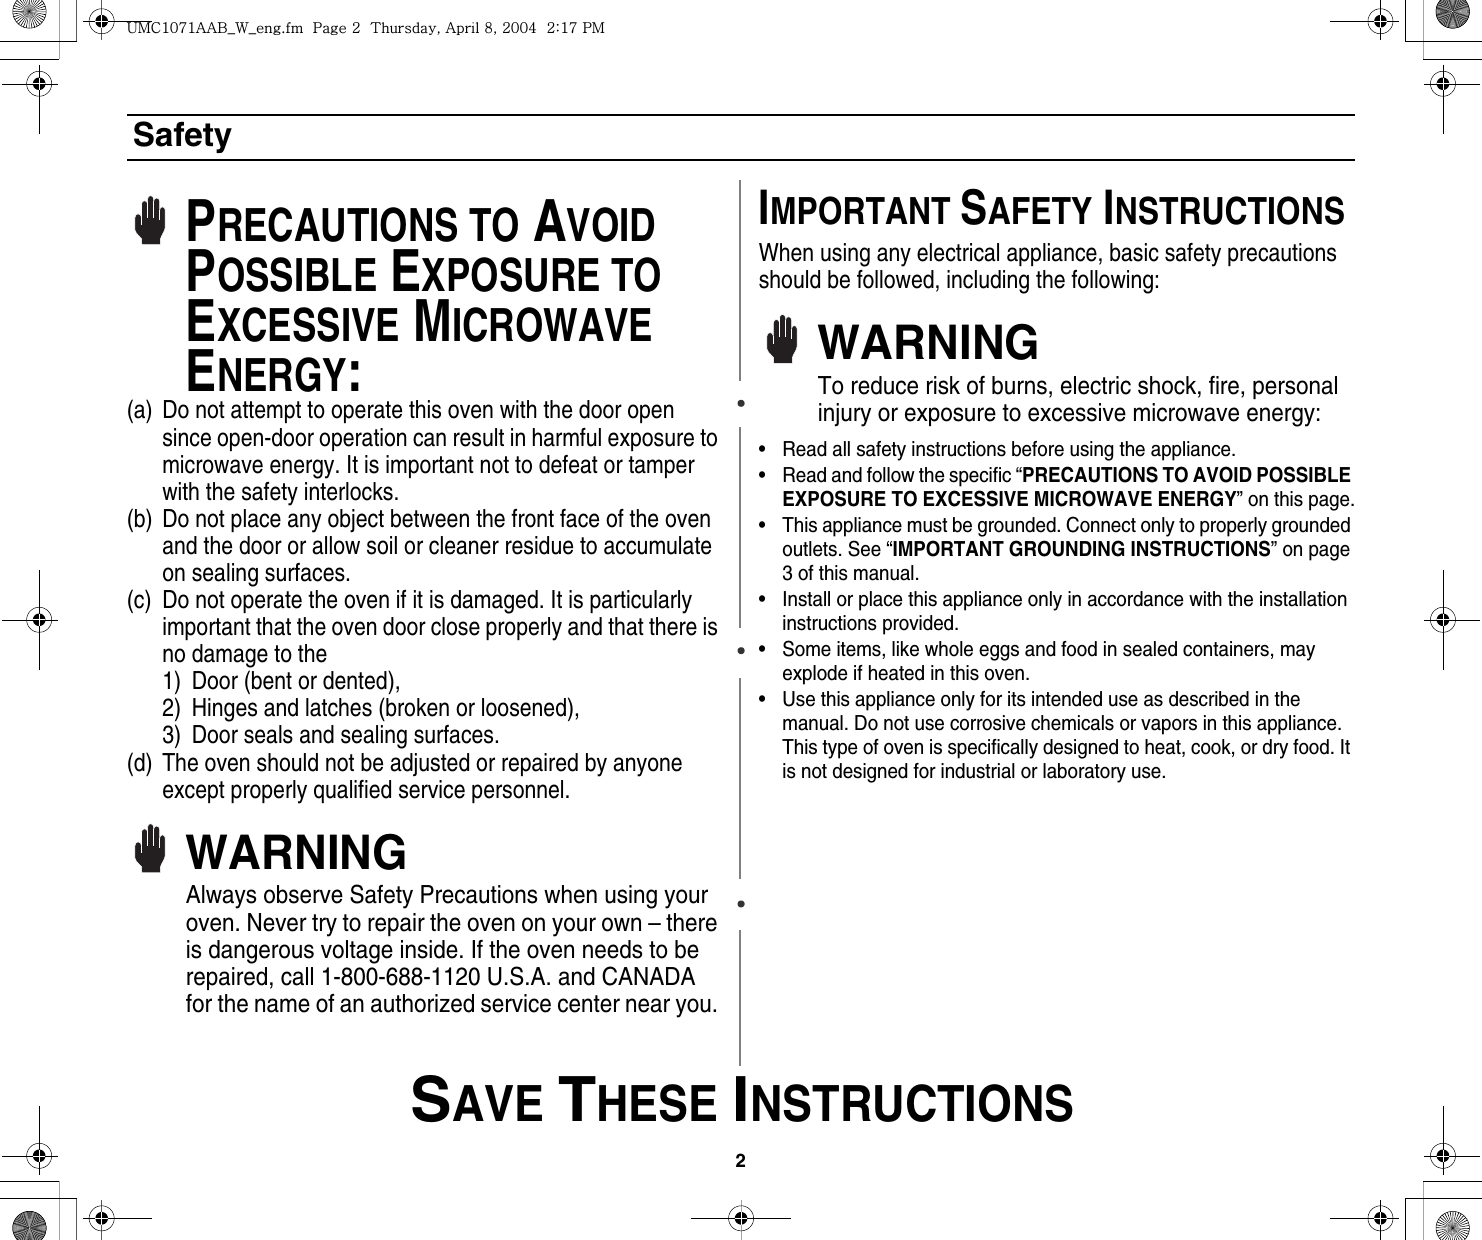 2 SAVE THESE INSTRUCTIONSSafetyPRECAUTIONS TO AVOID POSSIBLE EXPOSURE TO EXCESSIVE MICROWAVE ENERGY:(a) Do not attempt to operate this oven with the door open since open-door operation can result in harmful exposure to microwave energy. It is important not to defeat or tamper with the safety interlocks.(b) Do not place any object between the front face of the oven and the door or allow soil or cleaner residue to accumulate on sealing surfaces.(c) Do not operate the oven if it is damaged. It is particularly important that the oven door close properly and that there is no damage to the 1) Door (bent or dented), 2) Hinges and latches (broken or loosened), 3) Door seals and sealing surfaces.(d) The oven should not be adjusted or repaired by anyone except properly qualified service personnel.WARNINGAlways observe Safety Precautions when using your oven. Never try to repair the oven on your own – there is dangerous voltage inside. If the oven needs to be repaired, call 1-800-688-1120 U.S.A. and CANADA for the name of an authorized service center near you. IMPORTANT SAFETY INSTRUCTIONSWhen using any electrical appliance, basic safety precautions should be followed, including the following:WARNINGTo reduce risk of burns, electric shock, fire, personal injury or exposure to excessive microwave energy:• Read all safety instructions before using the appliance.• Read and follow the specific “PRECAUTIONS TO AVOID POSSIBLE EXPOSURE TO EXCESSIVE MICROWAVE ENERGY” on this page.• This appliance must be grounded. Connect only to properly grounded outlets. See “IMPORTANT GROUNDING INSTRUCTIONS” on page 3 of this manual. • Install or place this appliance only in accordance with the installation instructions provided.• Some items, like whole eggs and food in sealed containers, may explode if heated in this oven.• Use this appliance only for its intended use as described in the manual. Do not use corrosive chemicals or vapors in this appliance. This type of oven is specifically designed to heat, cook, or dry food. It is not designed for industrial or laboratory use.|tjXW^Xhhi~UGGwGYGG{SGhG_SGYWW[GGYaX^Gwt